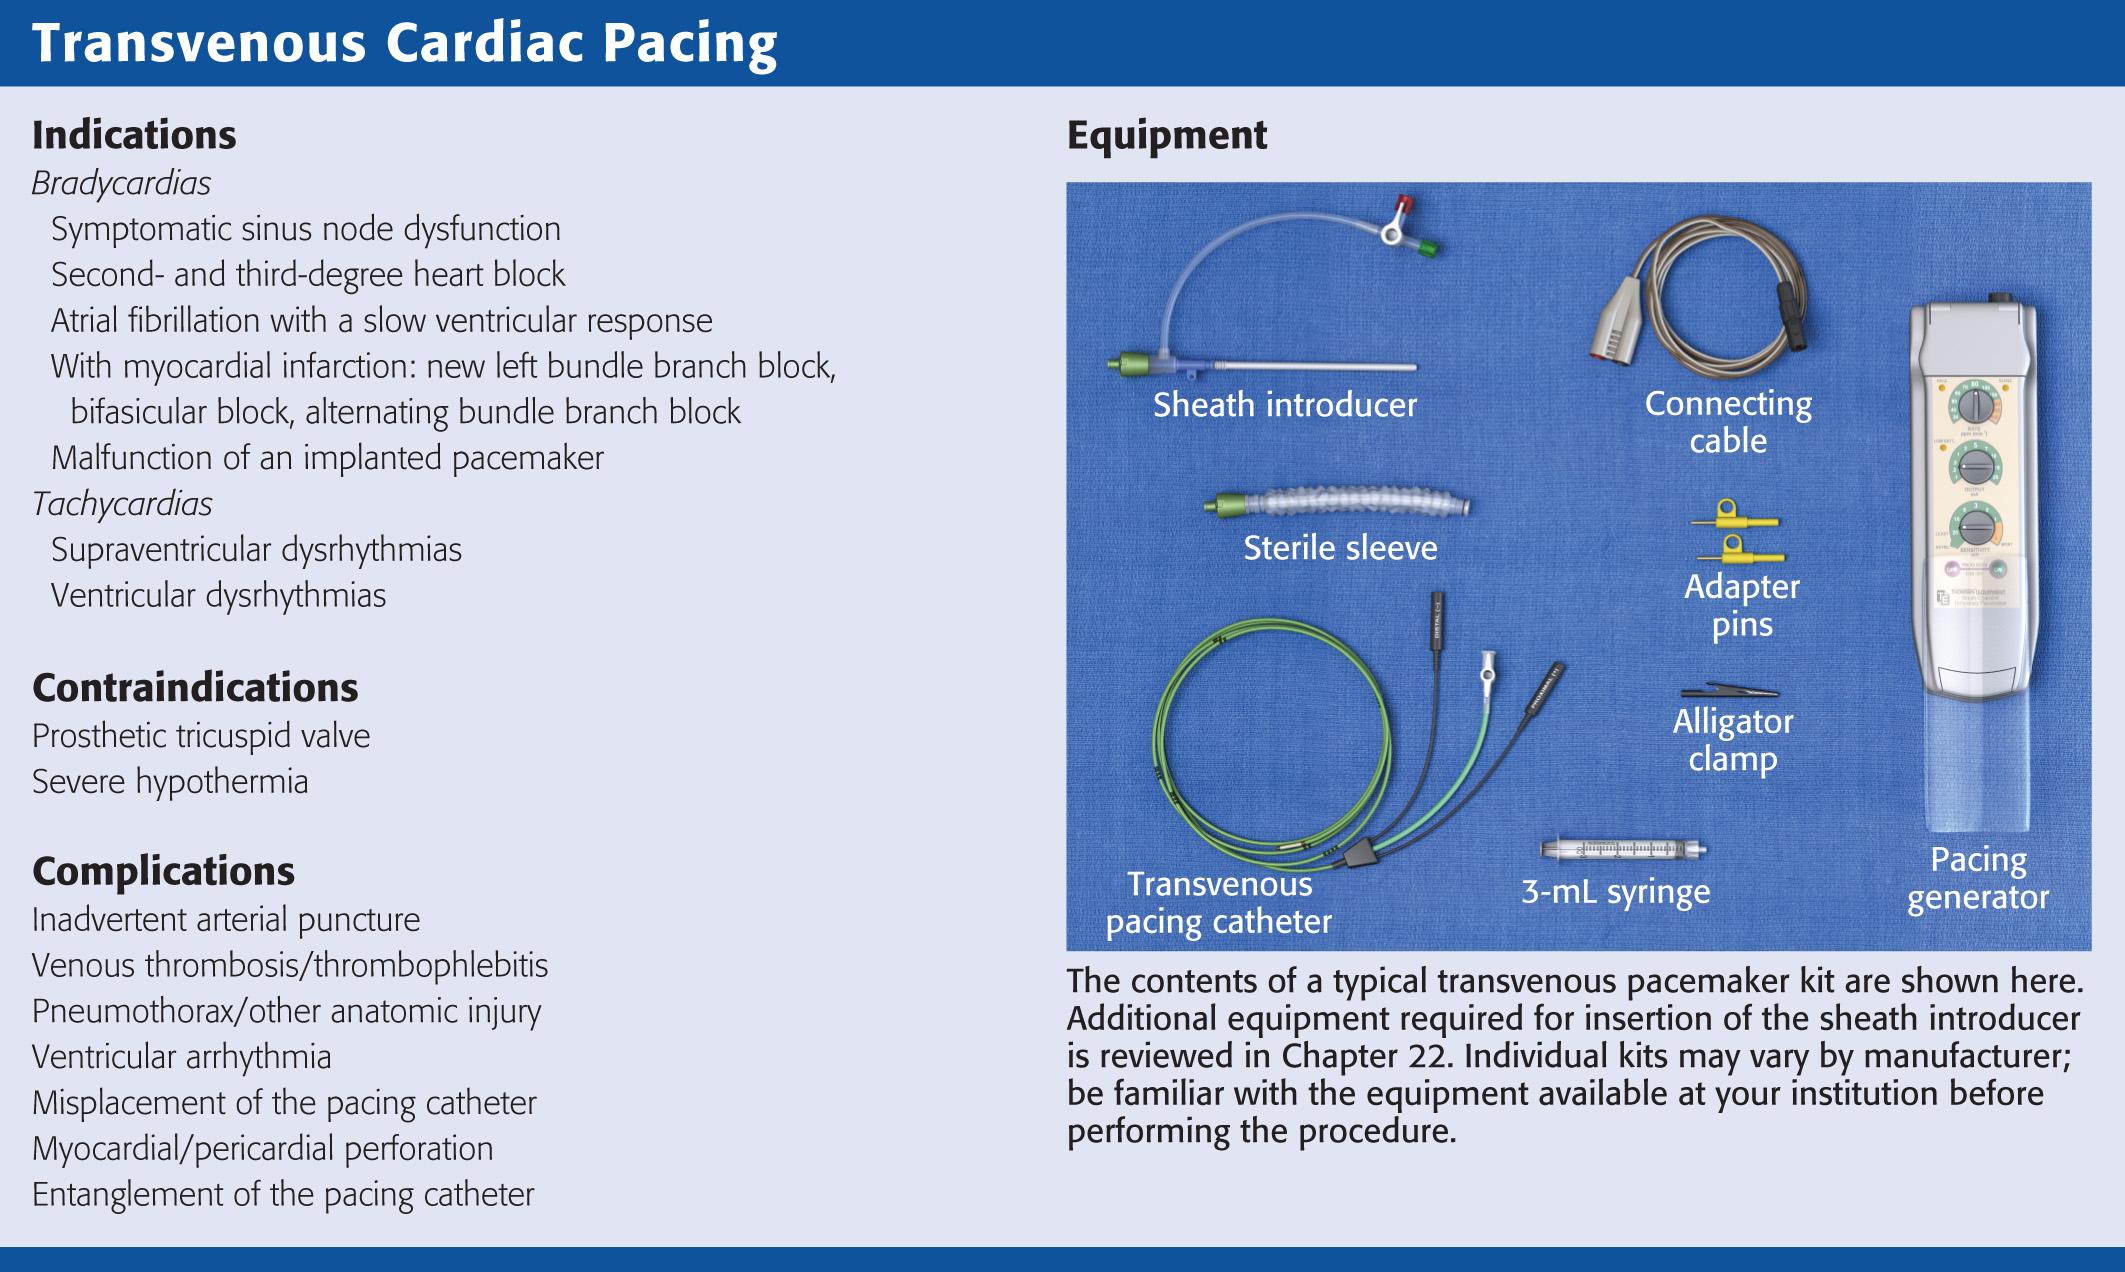 Review Box15.1, Transvenous cardiac pacing: indications, contraindications, complications, and equipment.